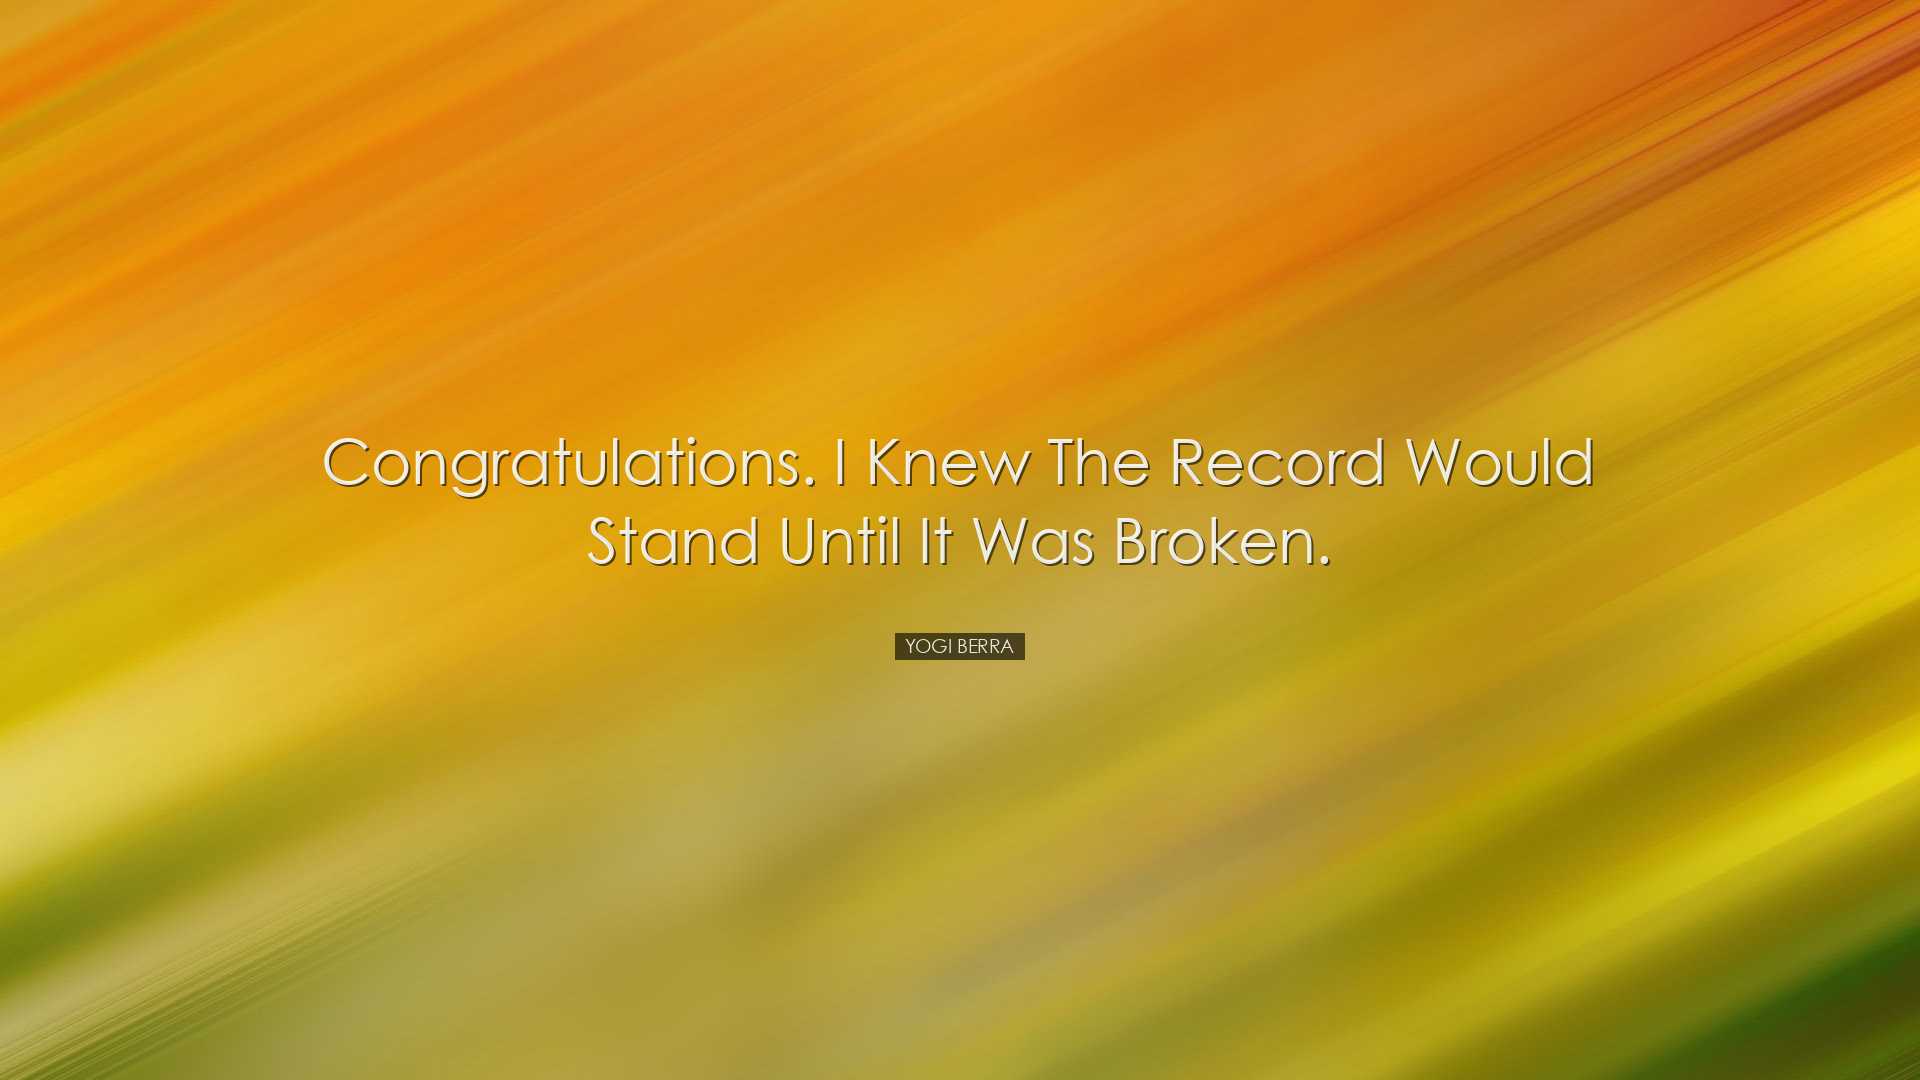 Congratulations. I knew the record would stand until it was broken